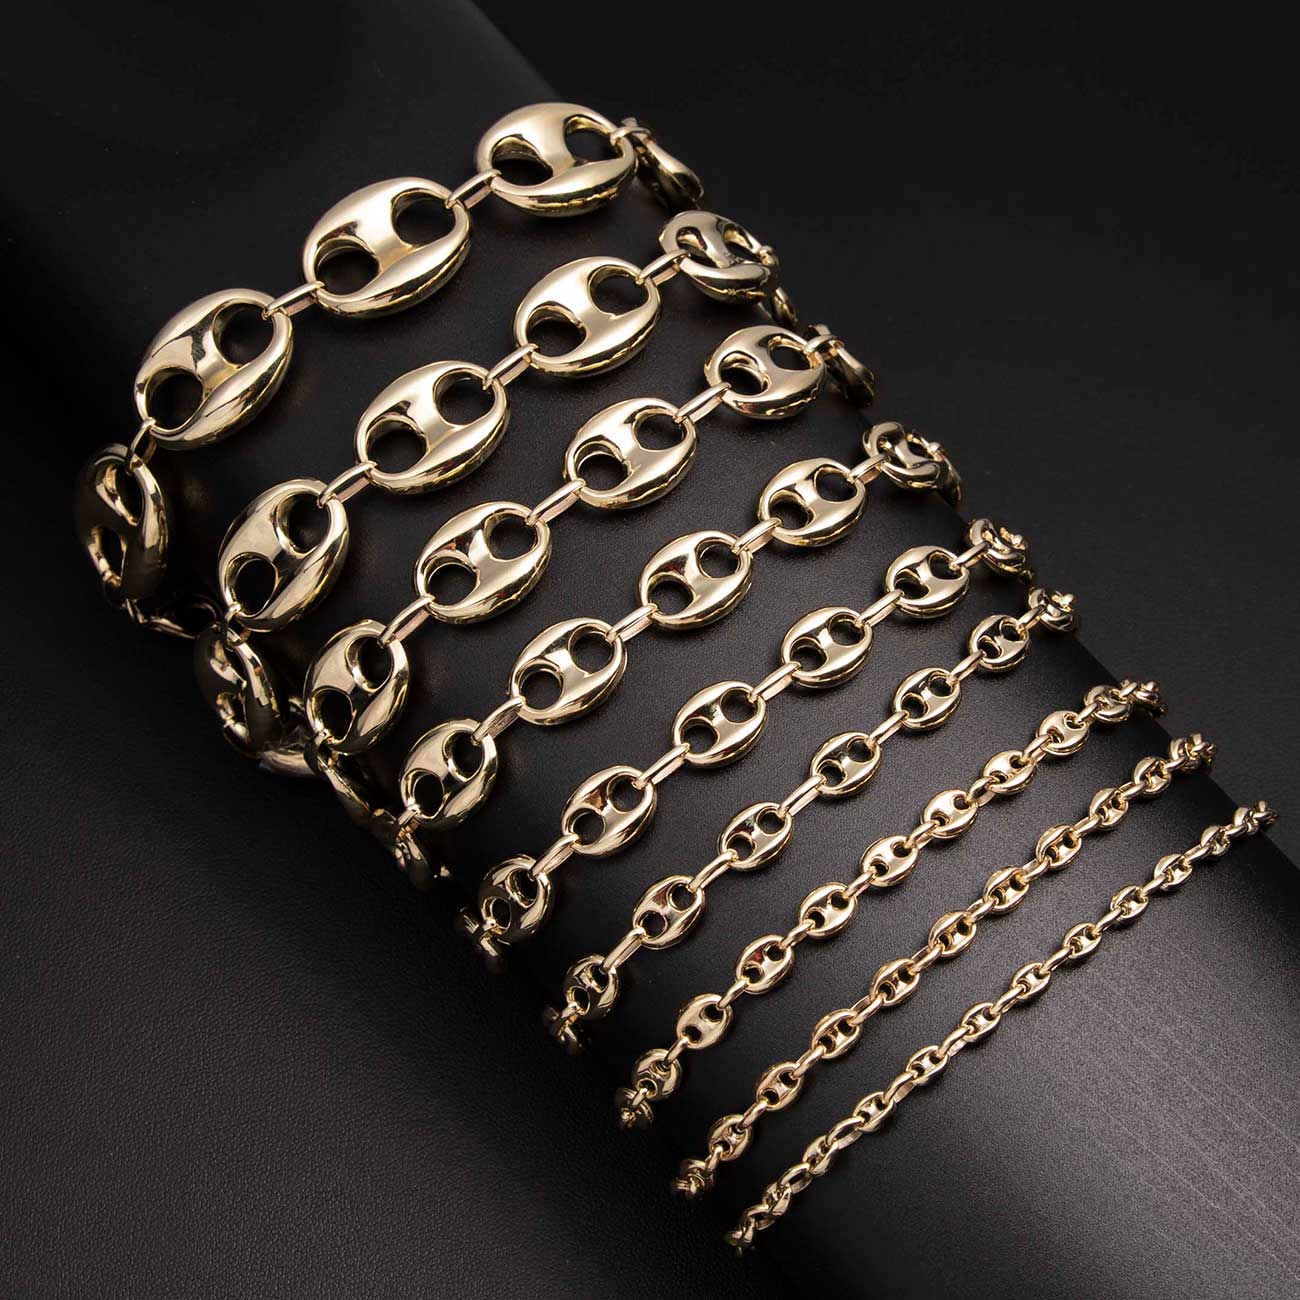 Puffed Gucci Link Chain Bracelet 10K & 14K Yellow Gold - Hollow